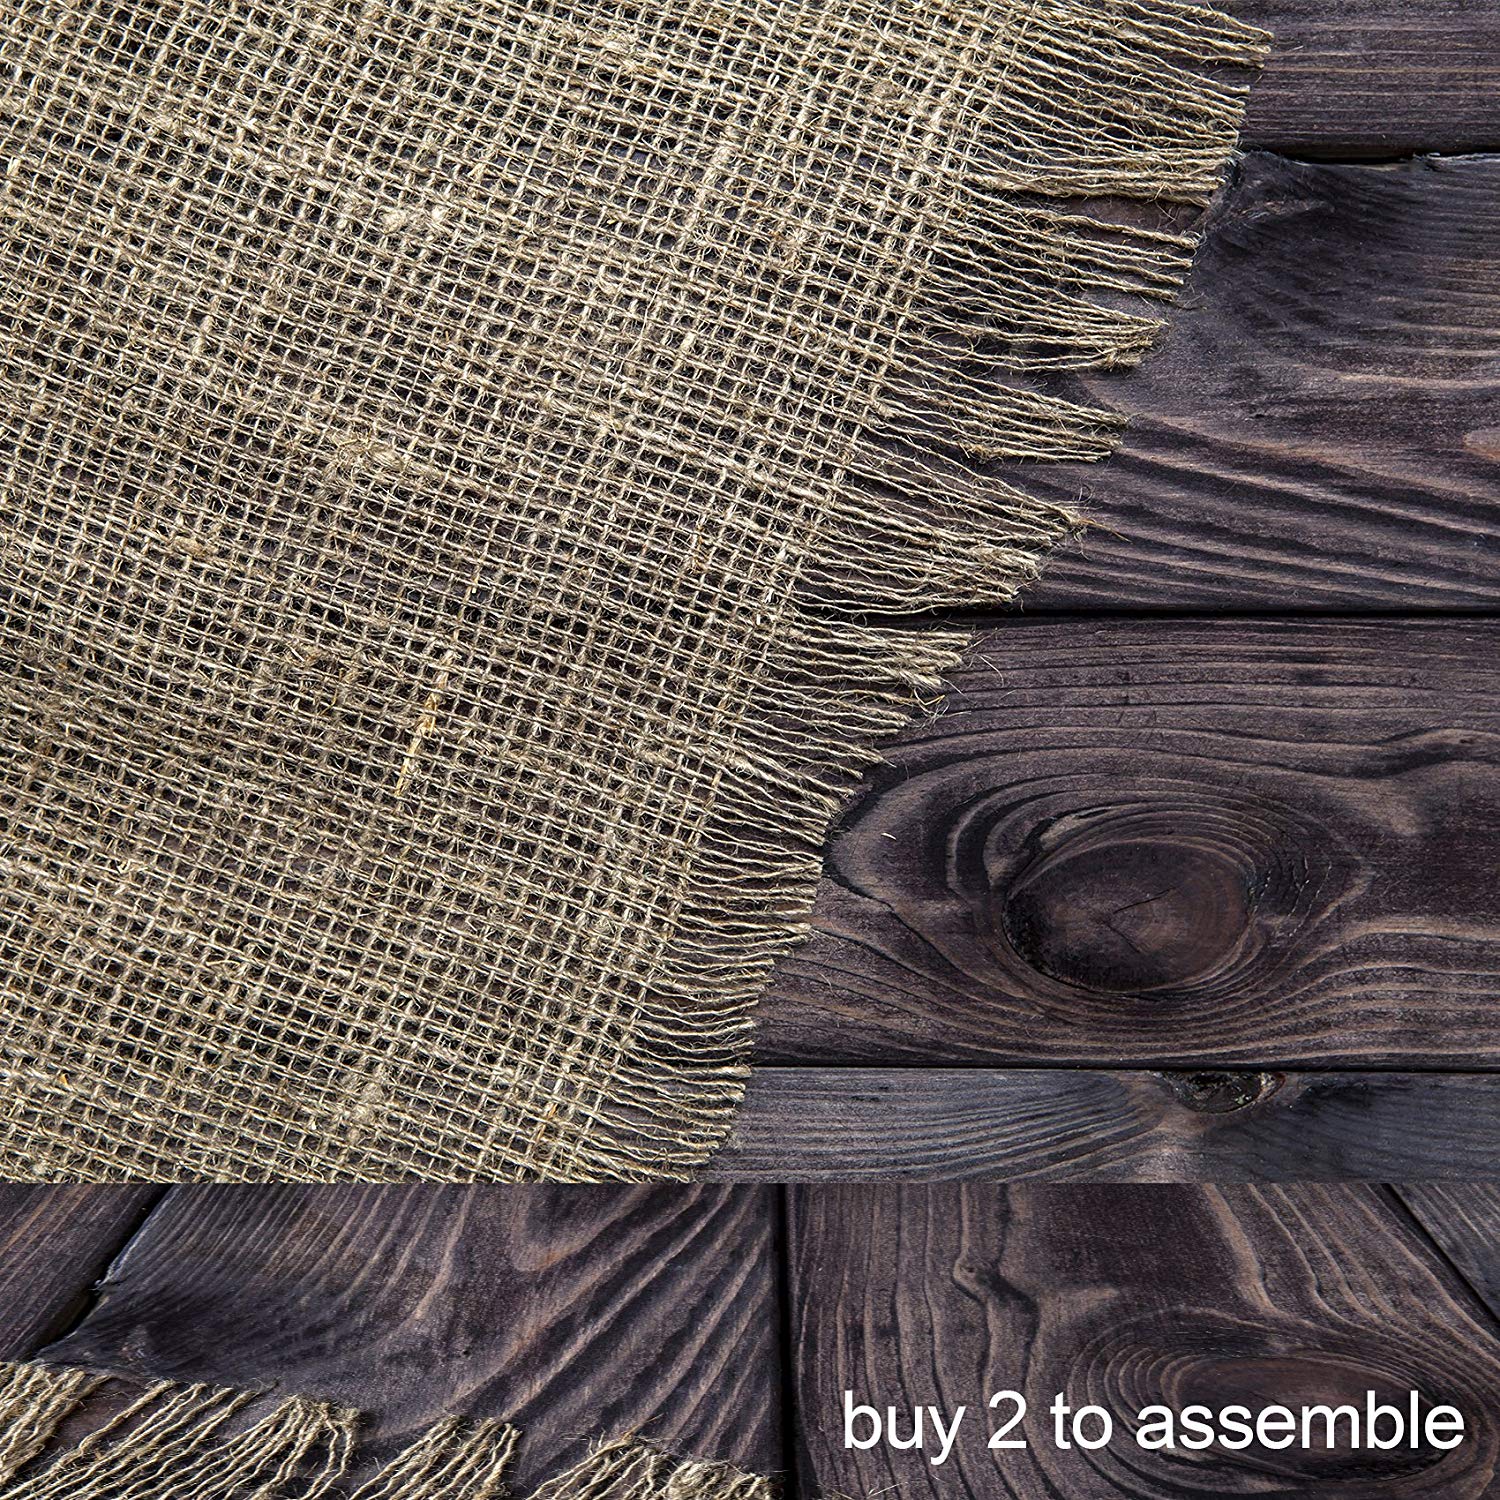 Rustic Distressed Burlap and Wood Backdrop Photography Background 5x3feet #1812